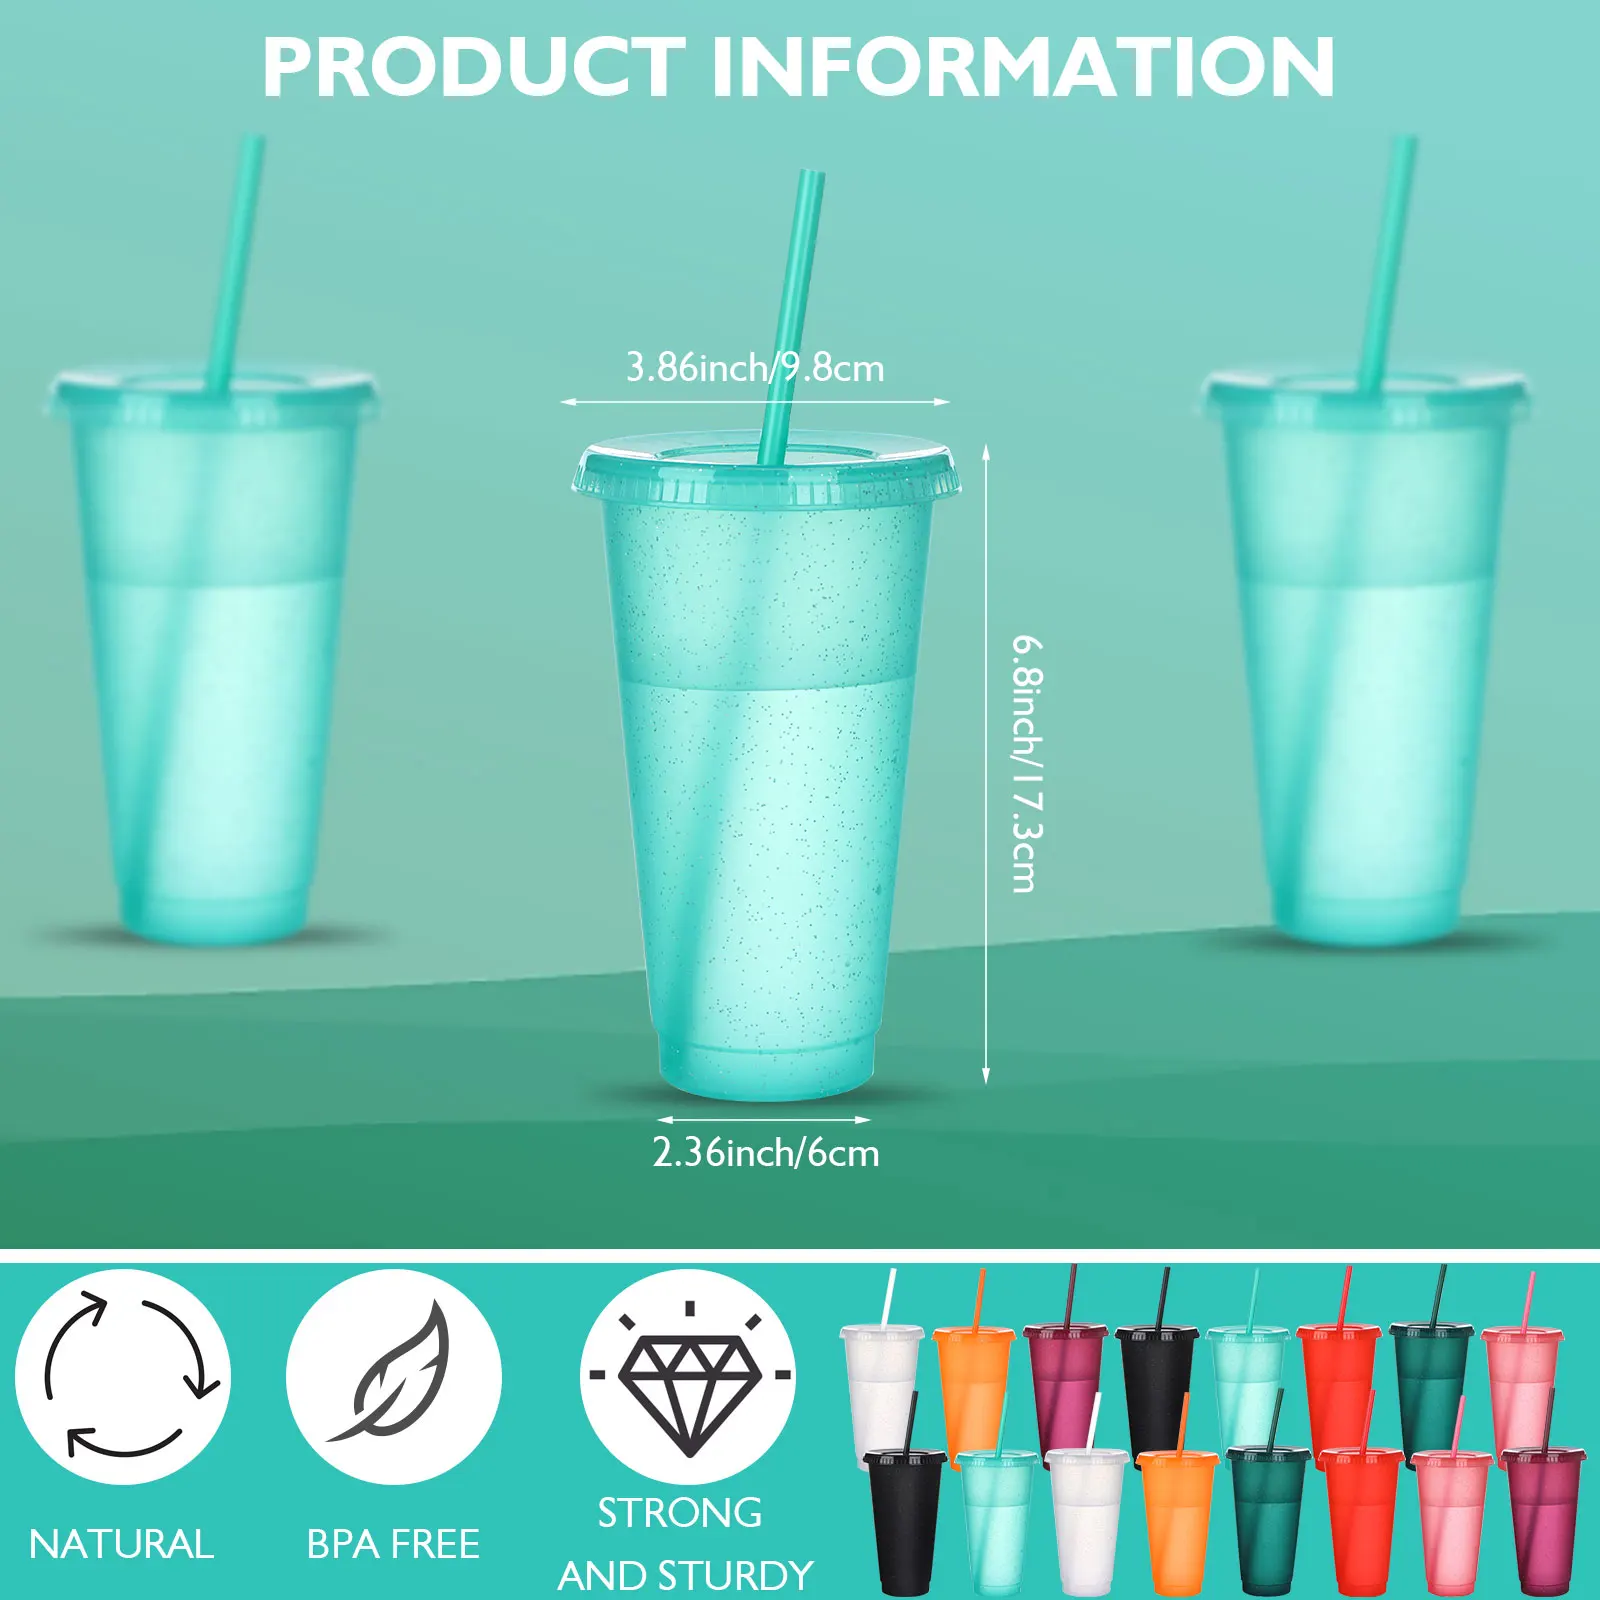 

16 Pieces Reusable Cups with Lids and Straws 24 oz Glitter Iced Coffee Tumbler Plastic Travel Mug Cup for Smoothie Juices Partie